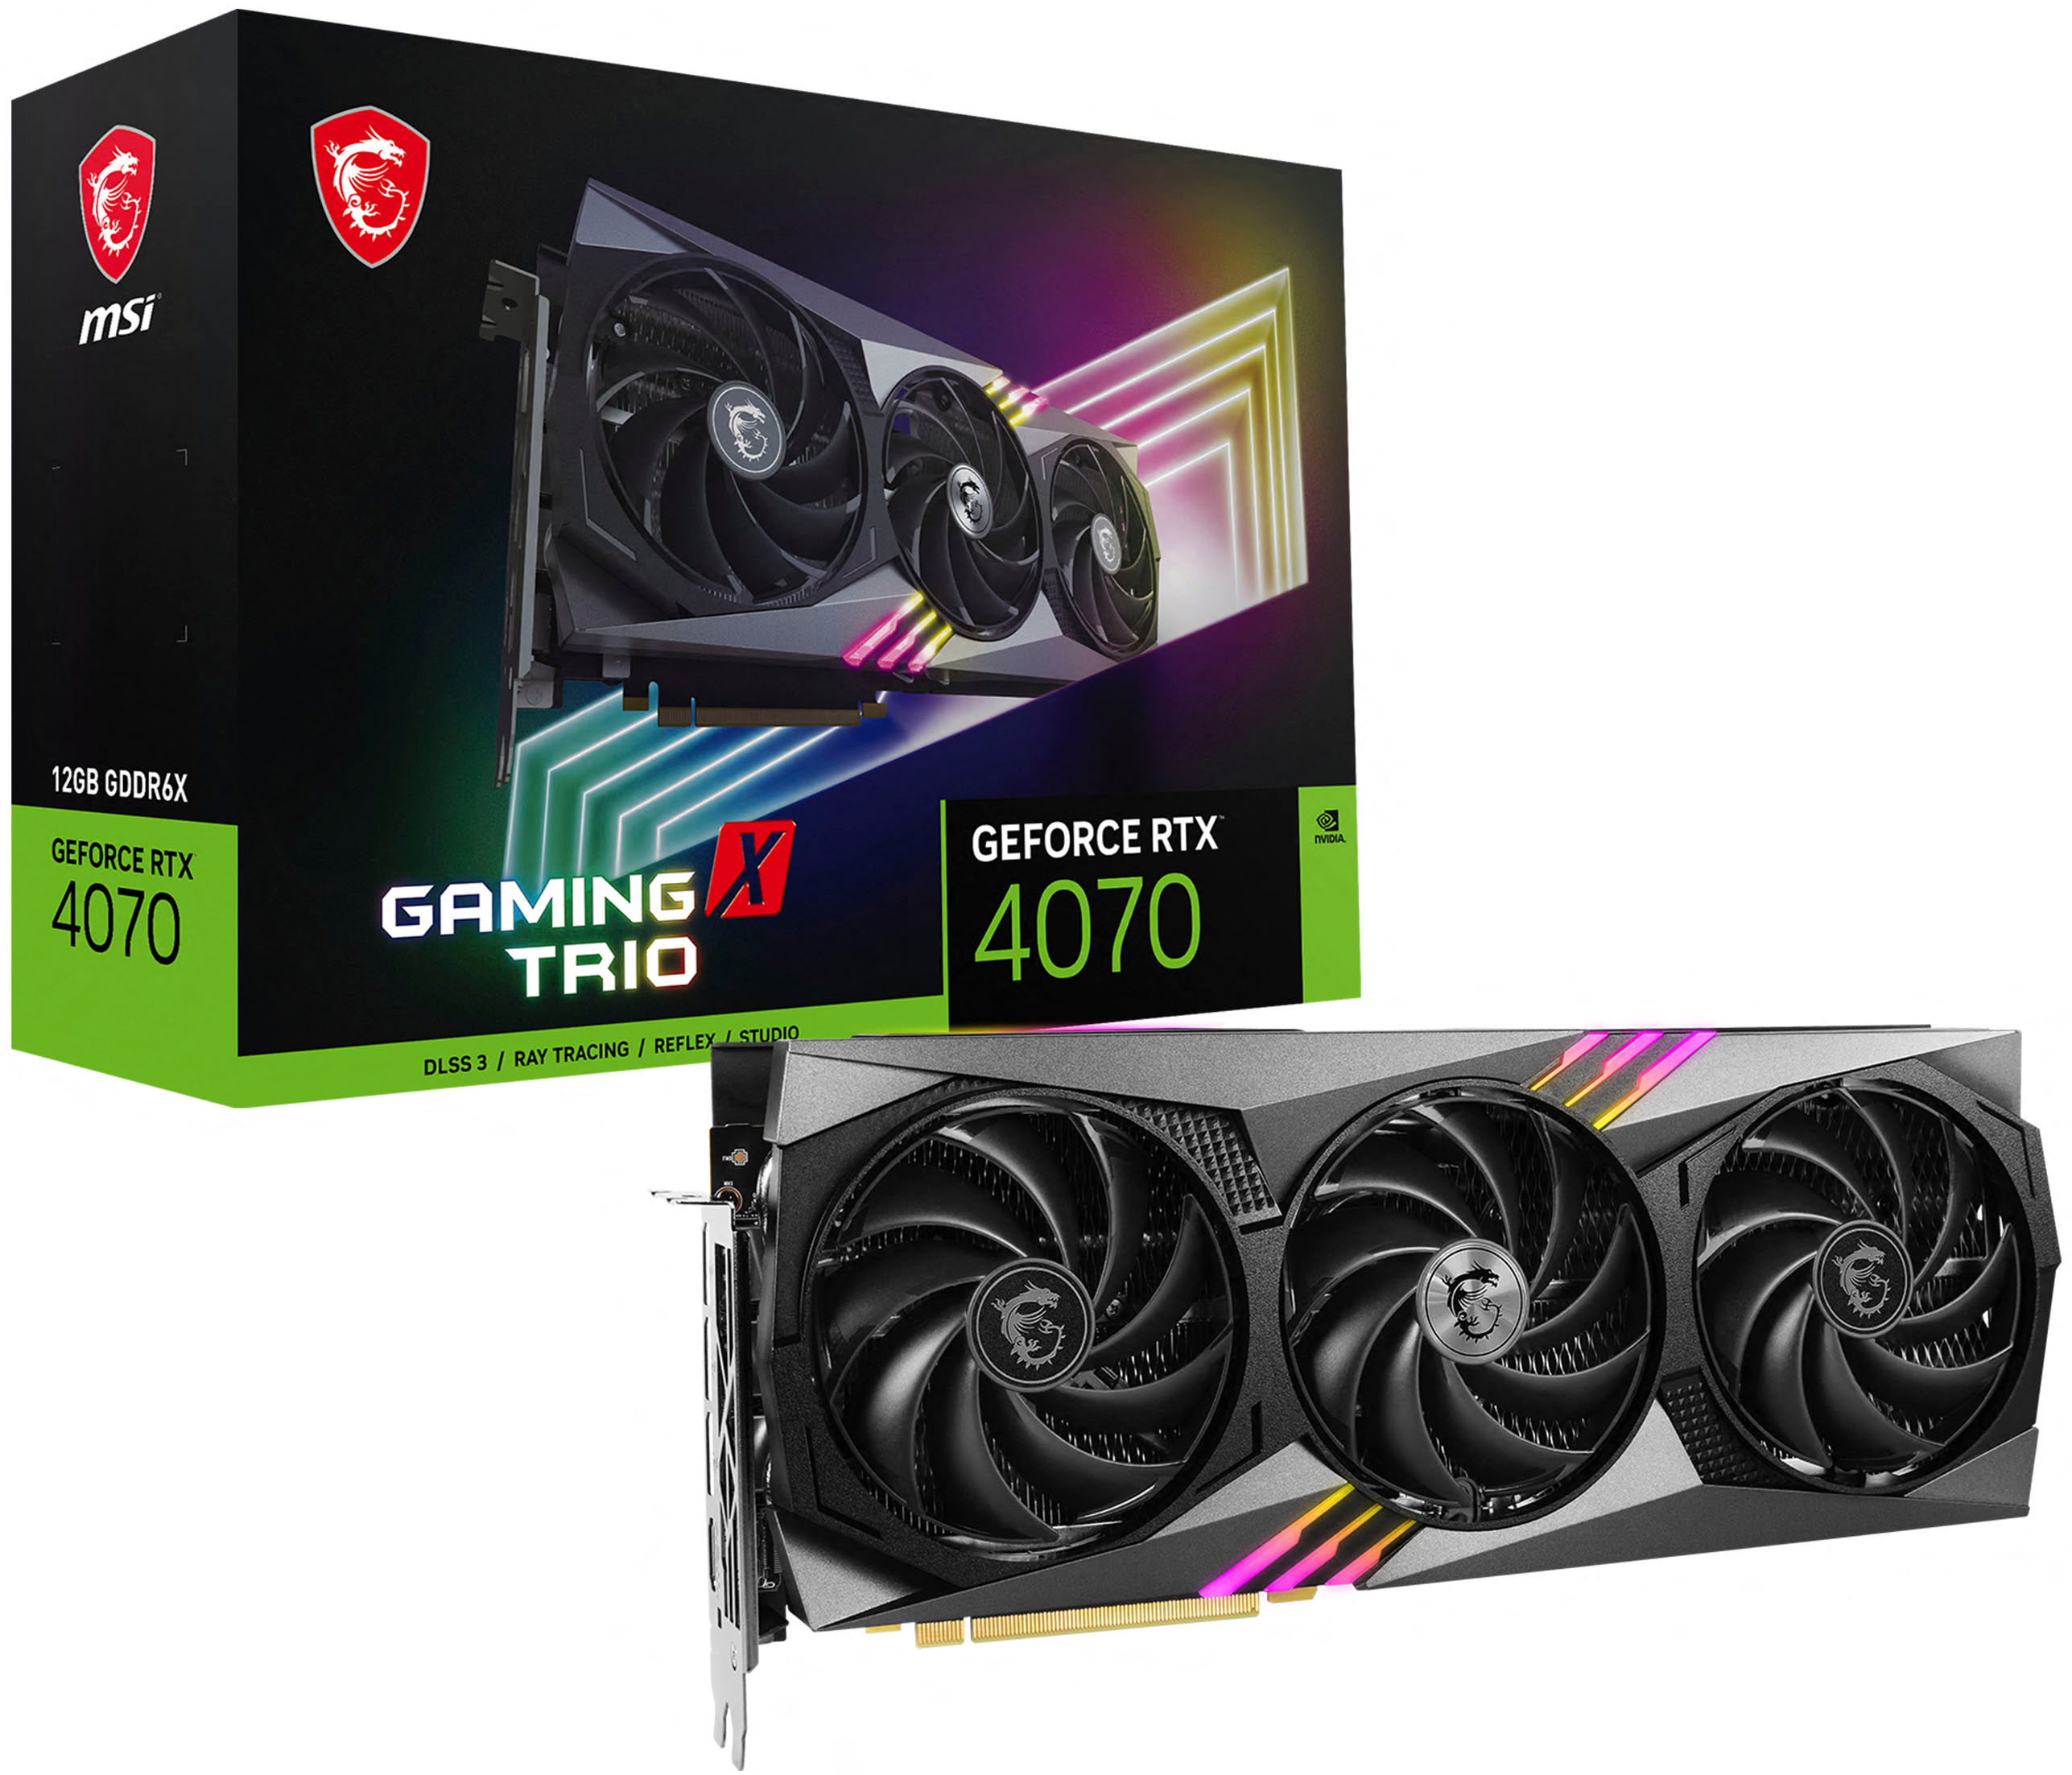 Nvidia GeForce RTX 4070 Vs RTX 3080 And RX 6800 XT: Which Should